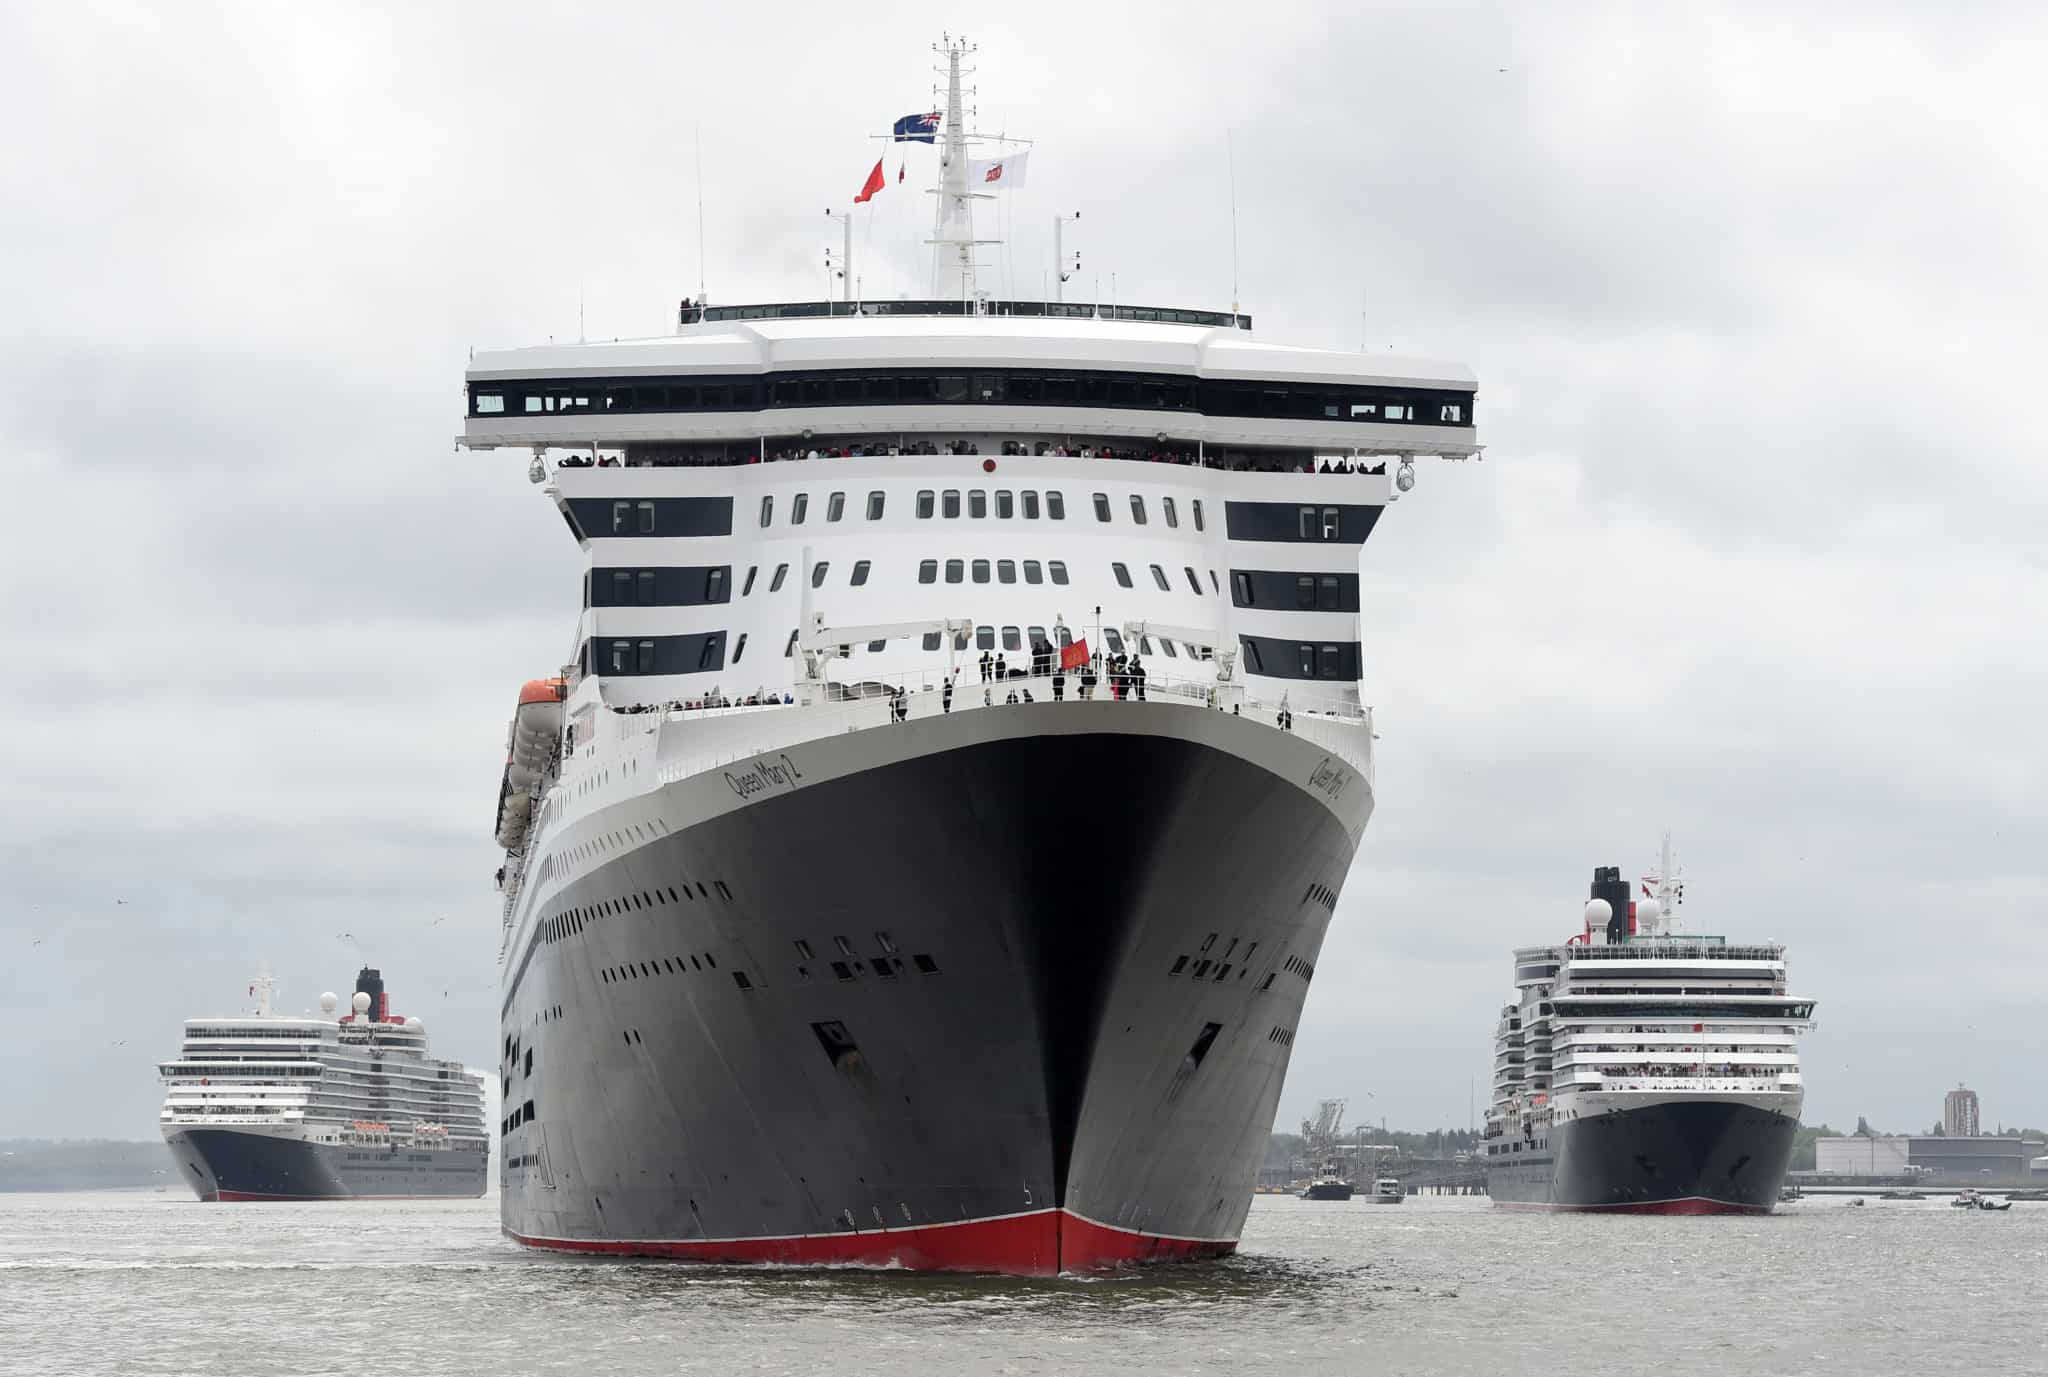 Cunard’s Three Queens Perform River Dance on the Mersey in Salute to Liverpool Where the Company Began 175 Years Ago | 9